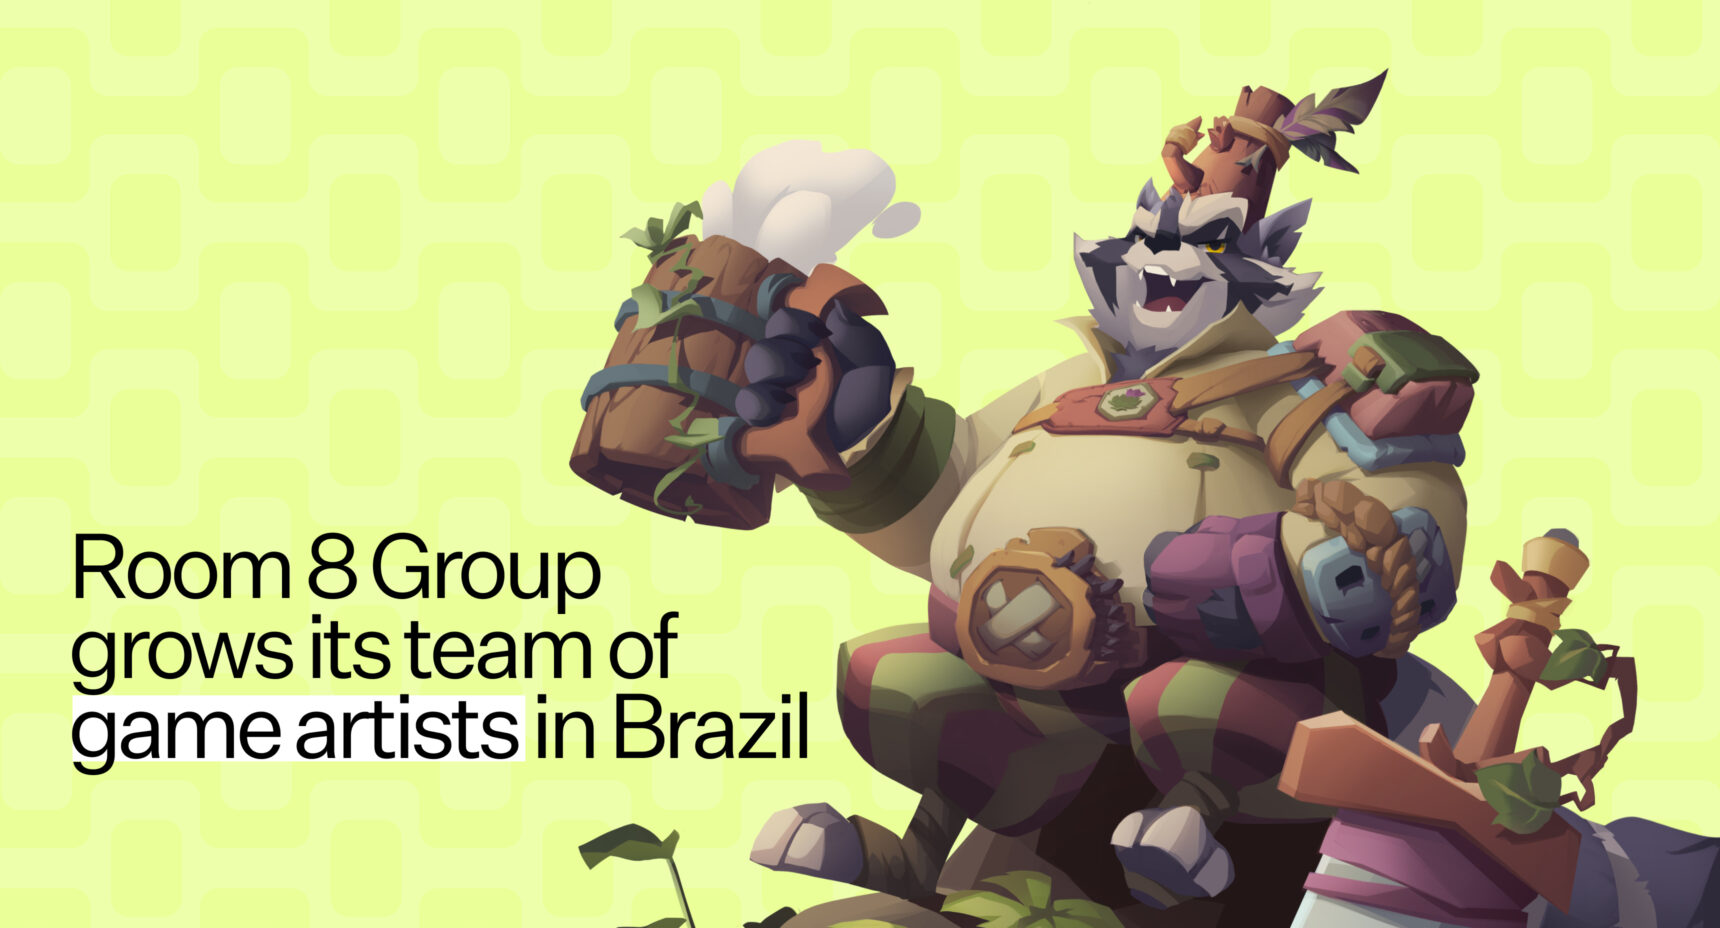 Room 8 Group Expands Game Art Team in Brazil